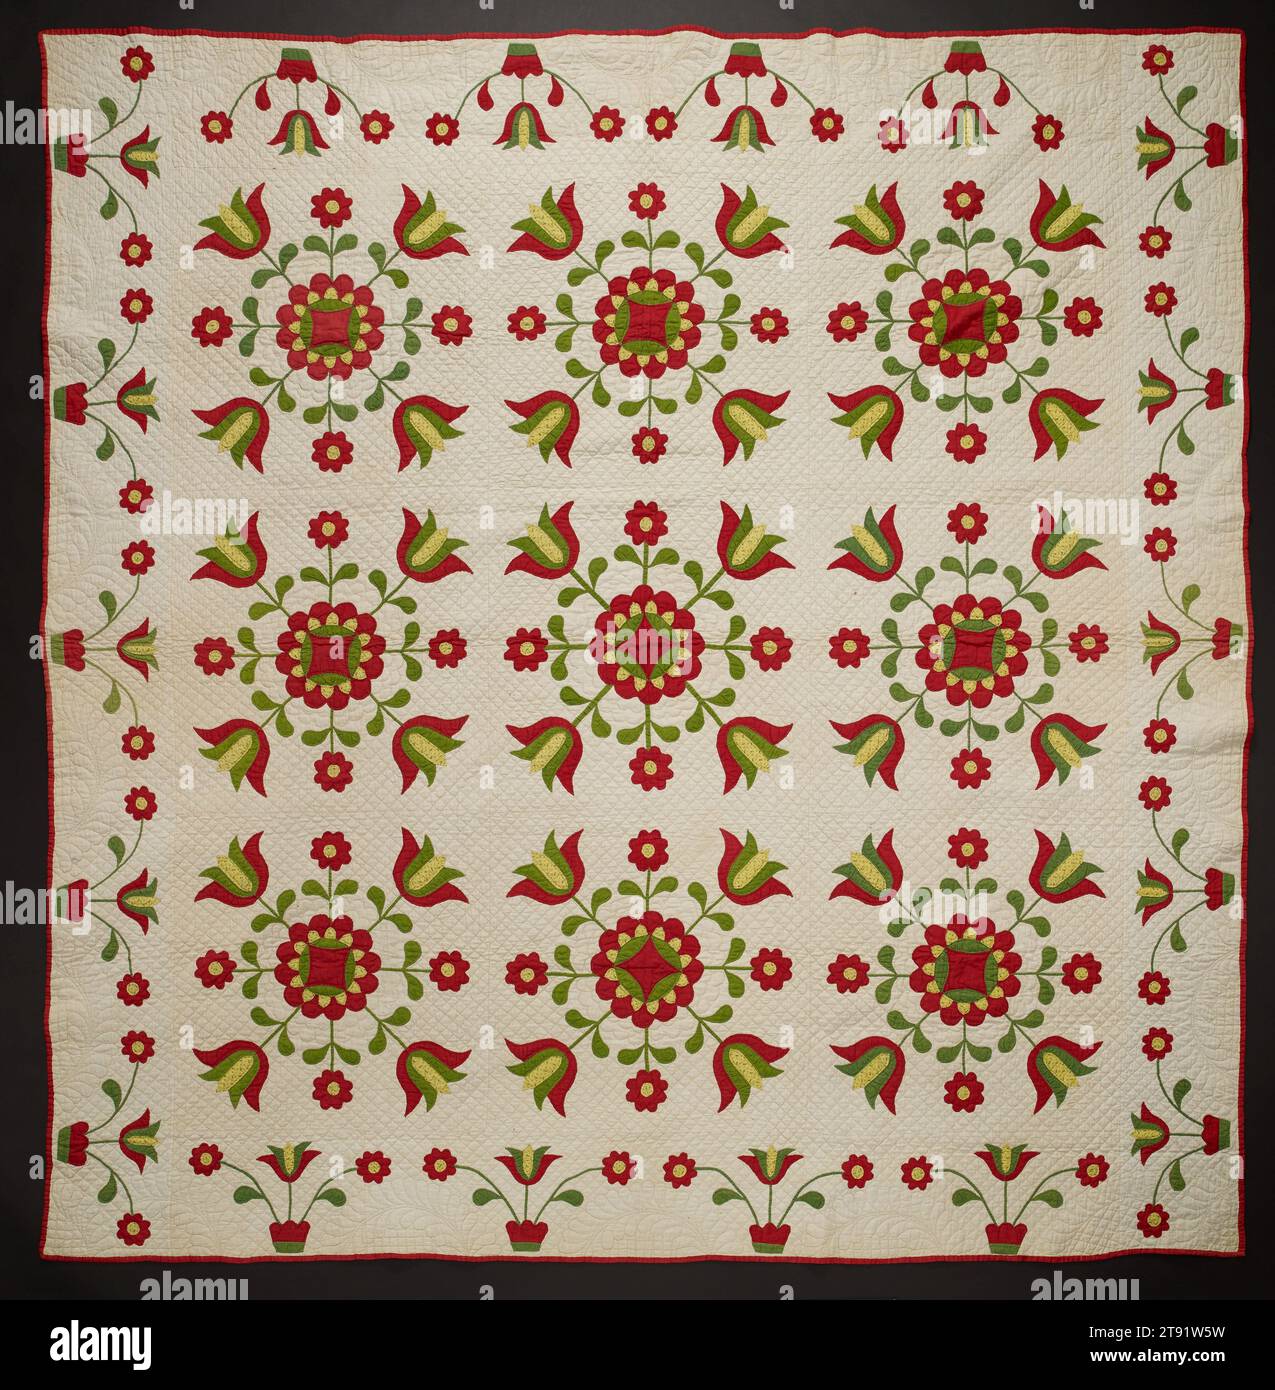 Floral appliqué quilt, c. 1860s–70s, 90 1/8 x 86 1/2 in. (228.92 x 219.71 cm), Cotton; pieced, appliquéd, and quilted, United States, 19th century, Many quilts from the 1700s and early 1800s featured a large central motif, called a medallion. But in the mid-1800s, block-style quilts surged in popularity. This one has nine blocks, each punctuated with a spray of green and red tulips. One advantage of such quilts was that the squares—usually one or two feet wide—were easy to carry along on social visits, allowing women to stitch as they chatted. This meant 'free time' was always productive. Stock Photo